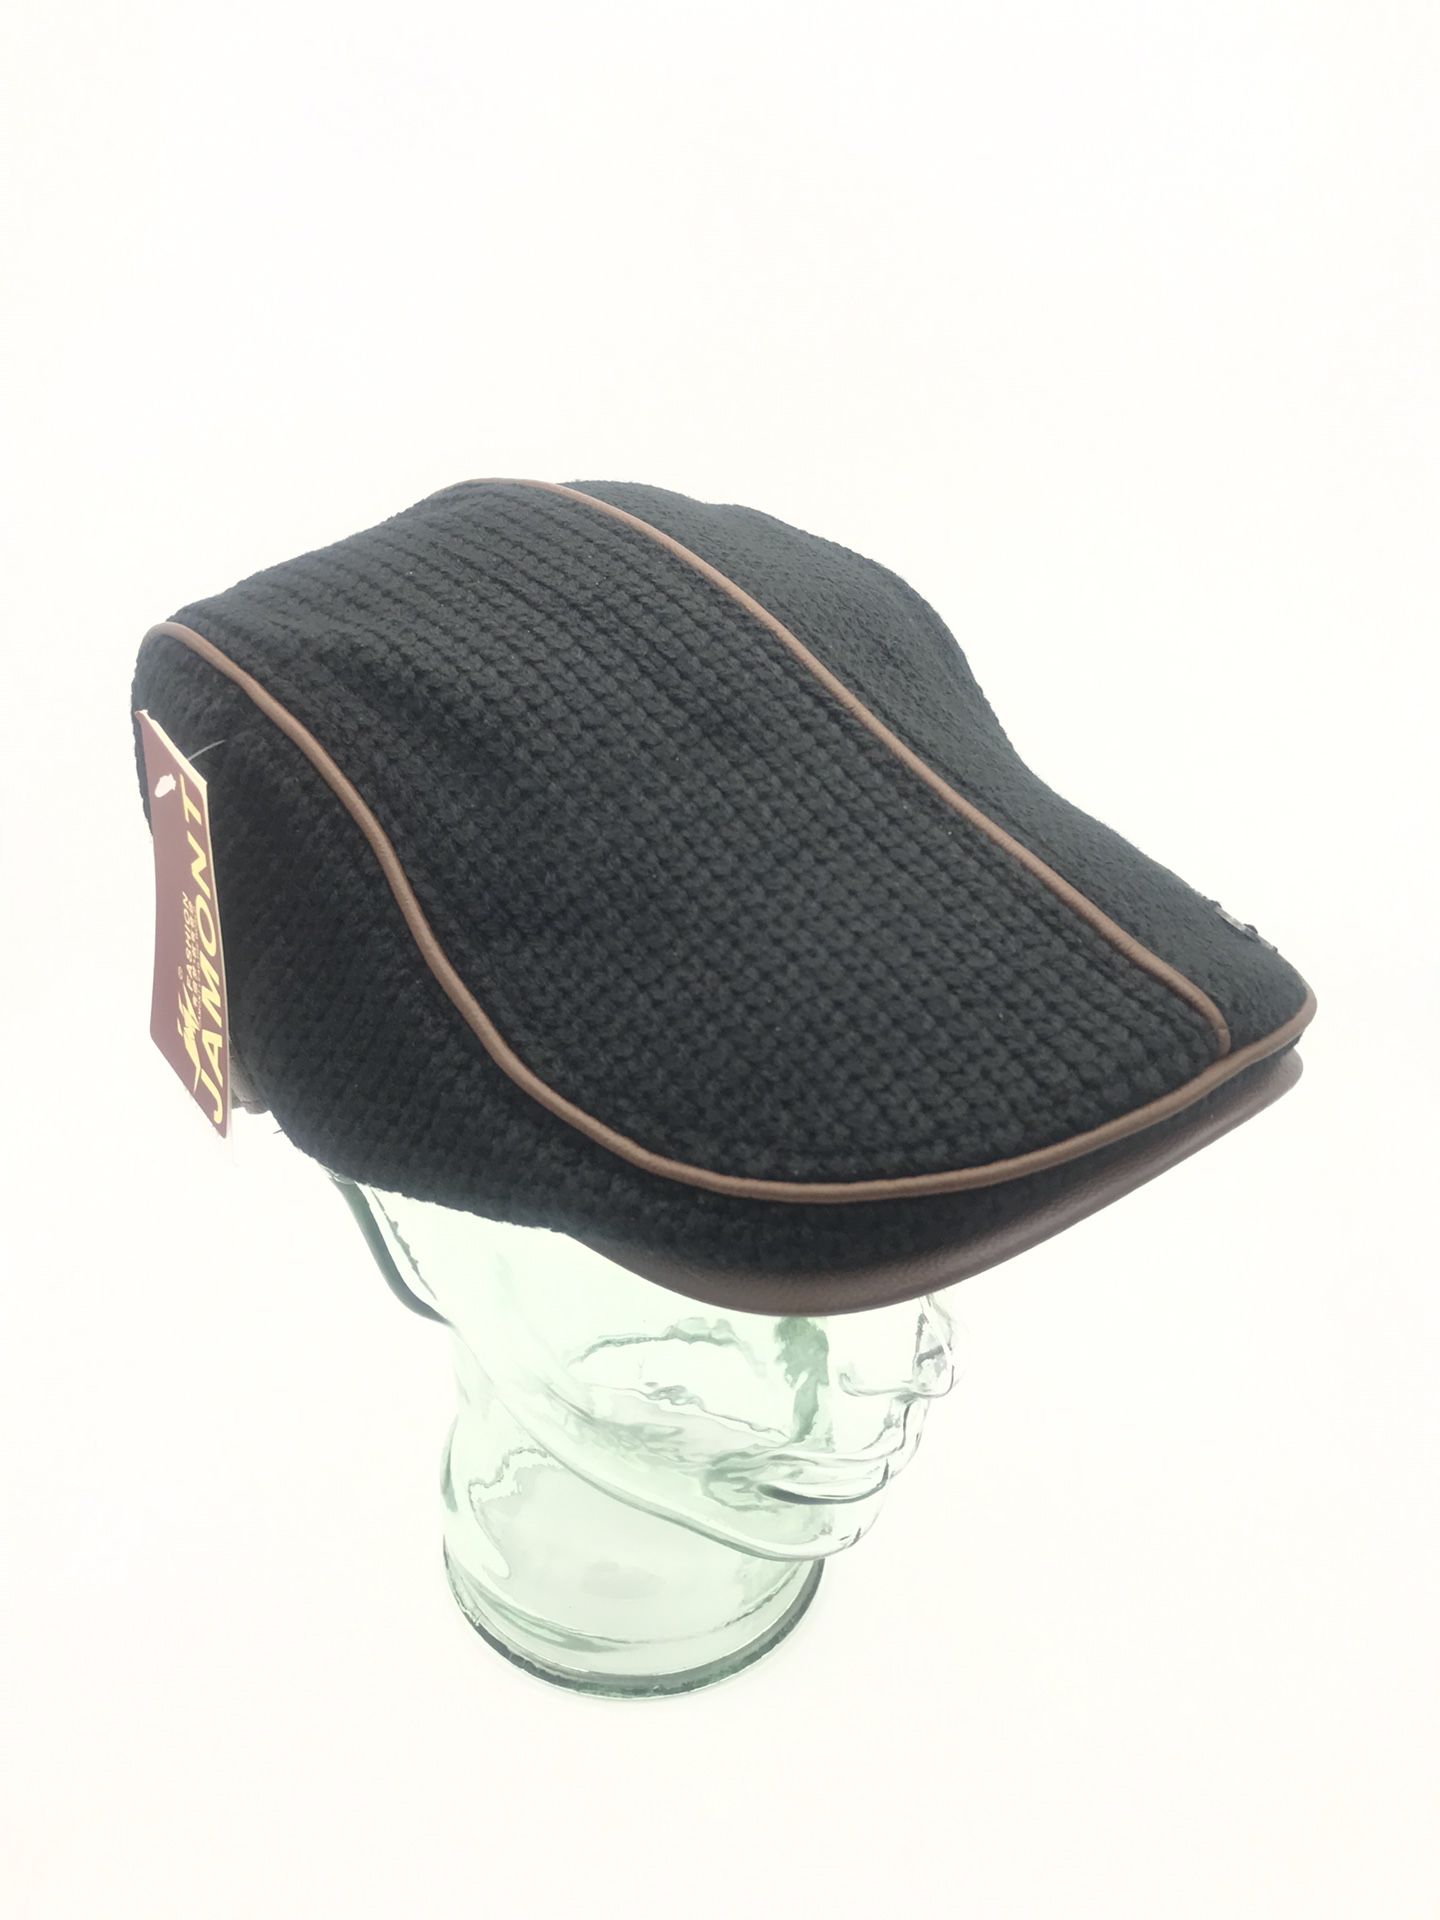 Knitted Beret for Men Black Boina Hombre Adjustable Hat *Free delivery within 5 miles